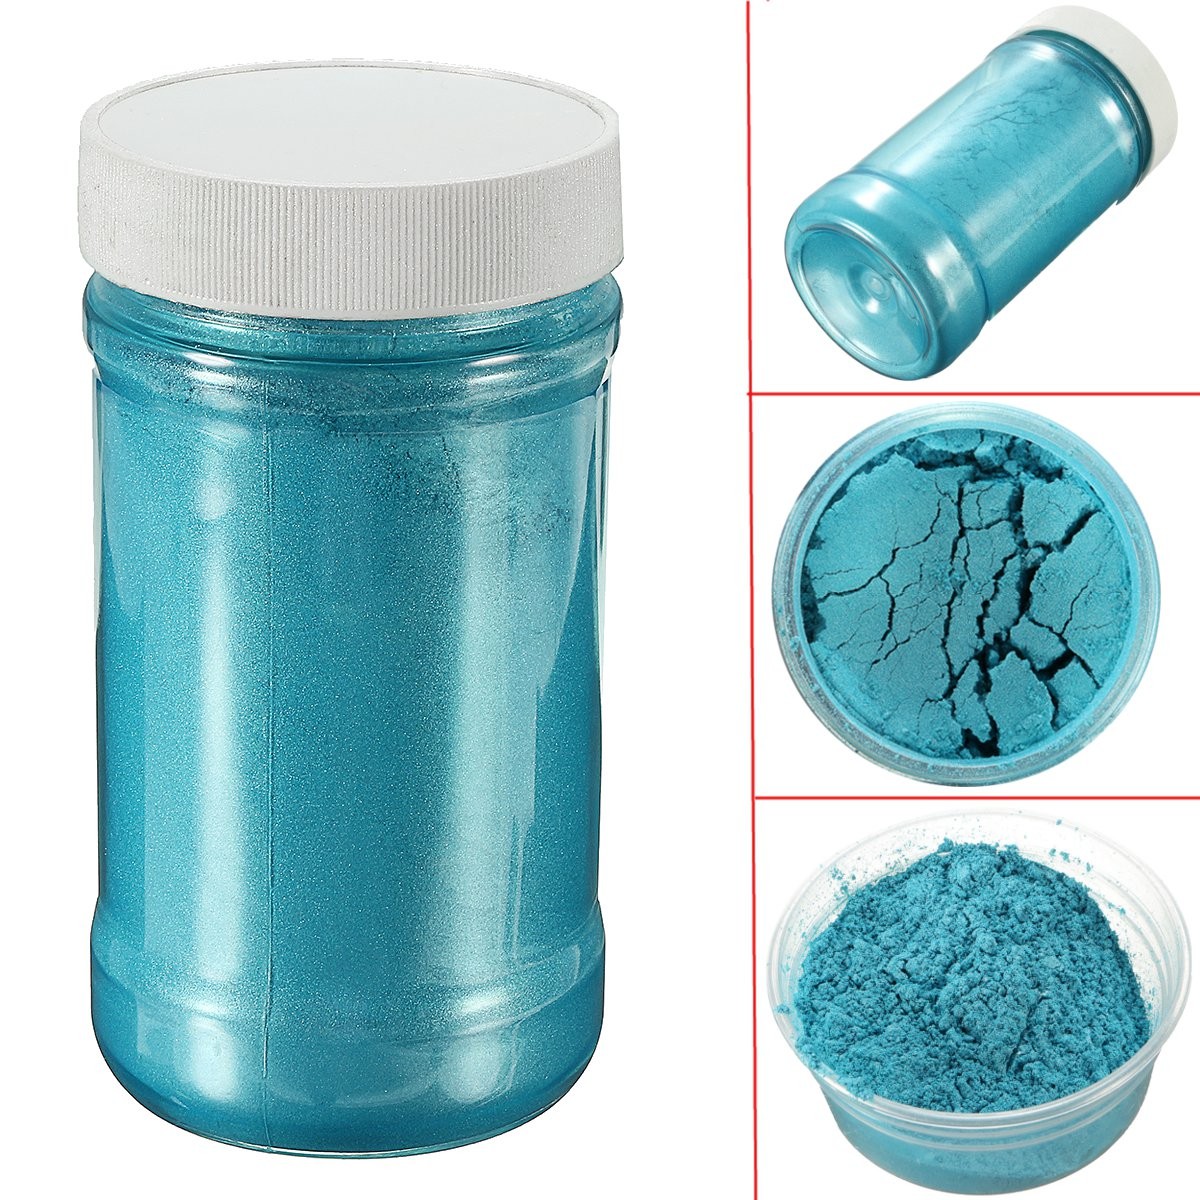 100g-Blue-Ghosting-Shimmer-Sparkle-Pearl-Pigment-Ghost-Flames-Paint-Powder-1302370